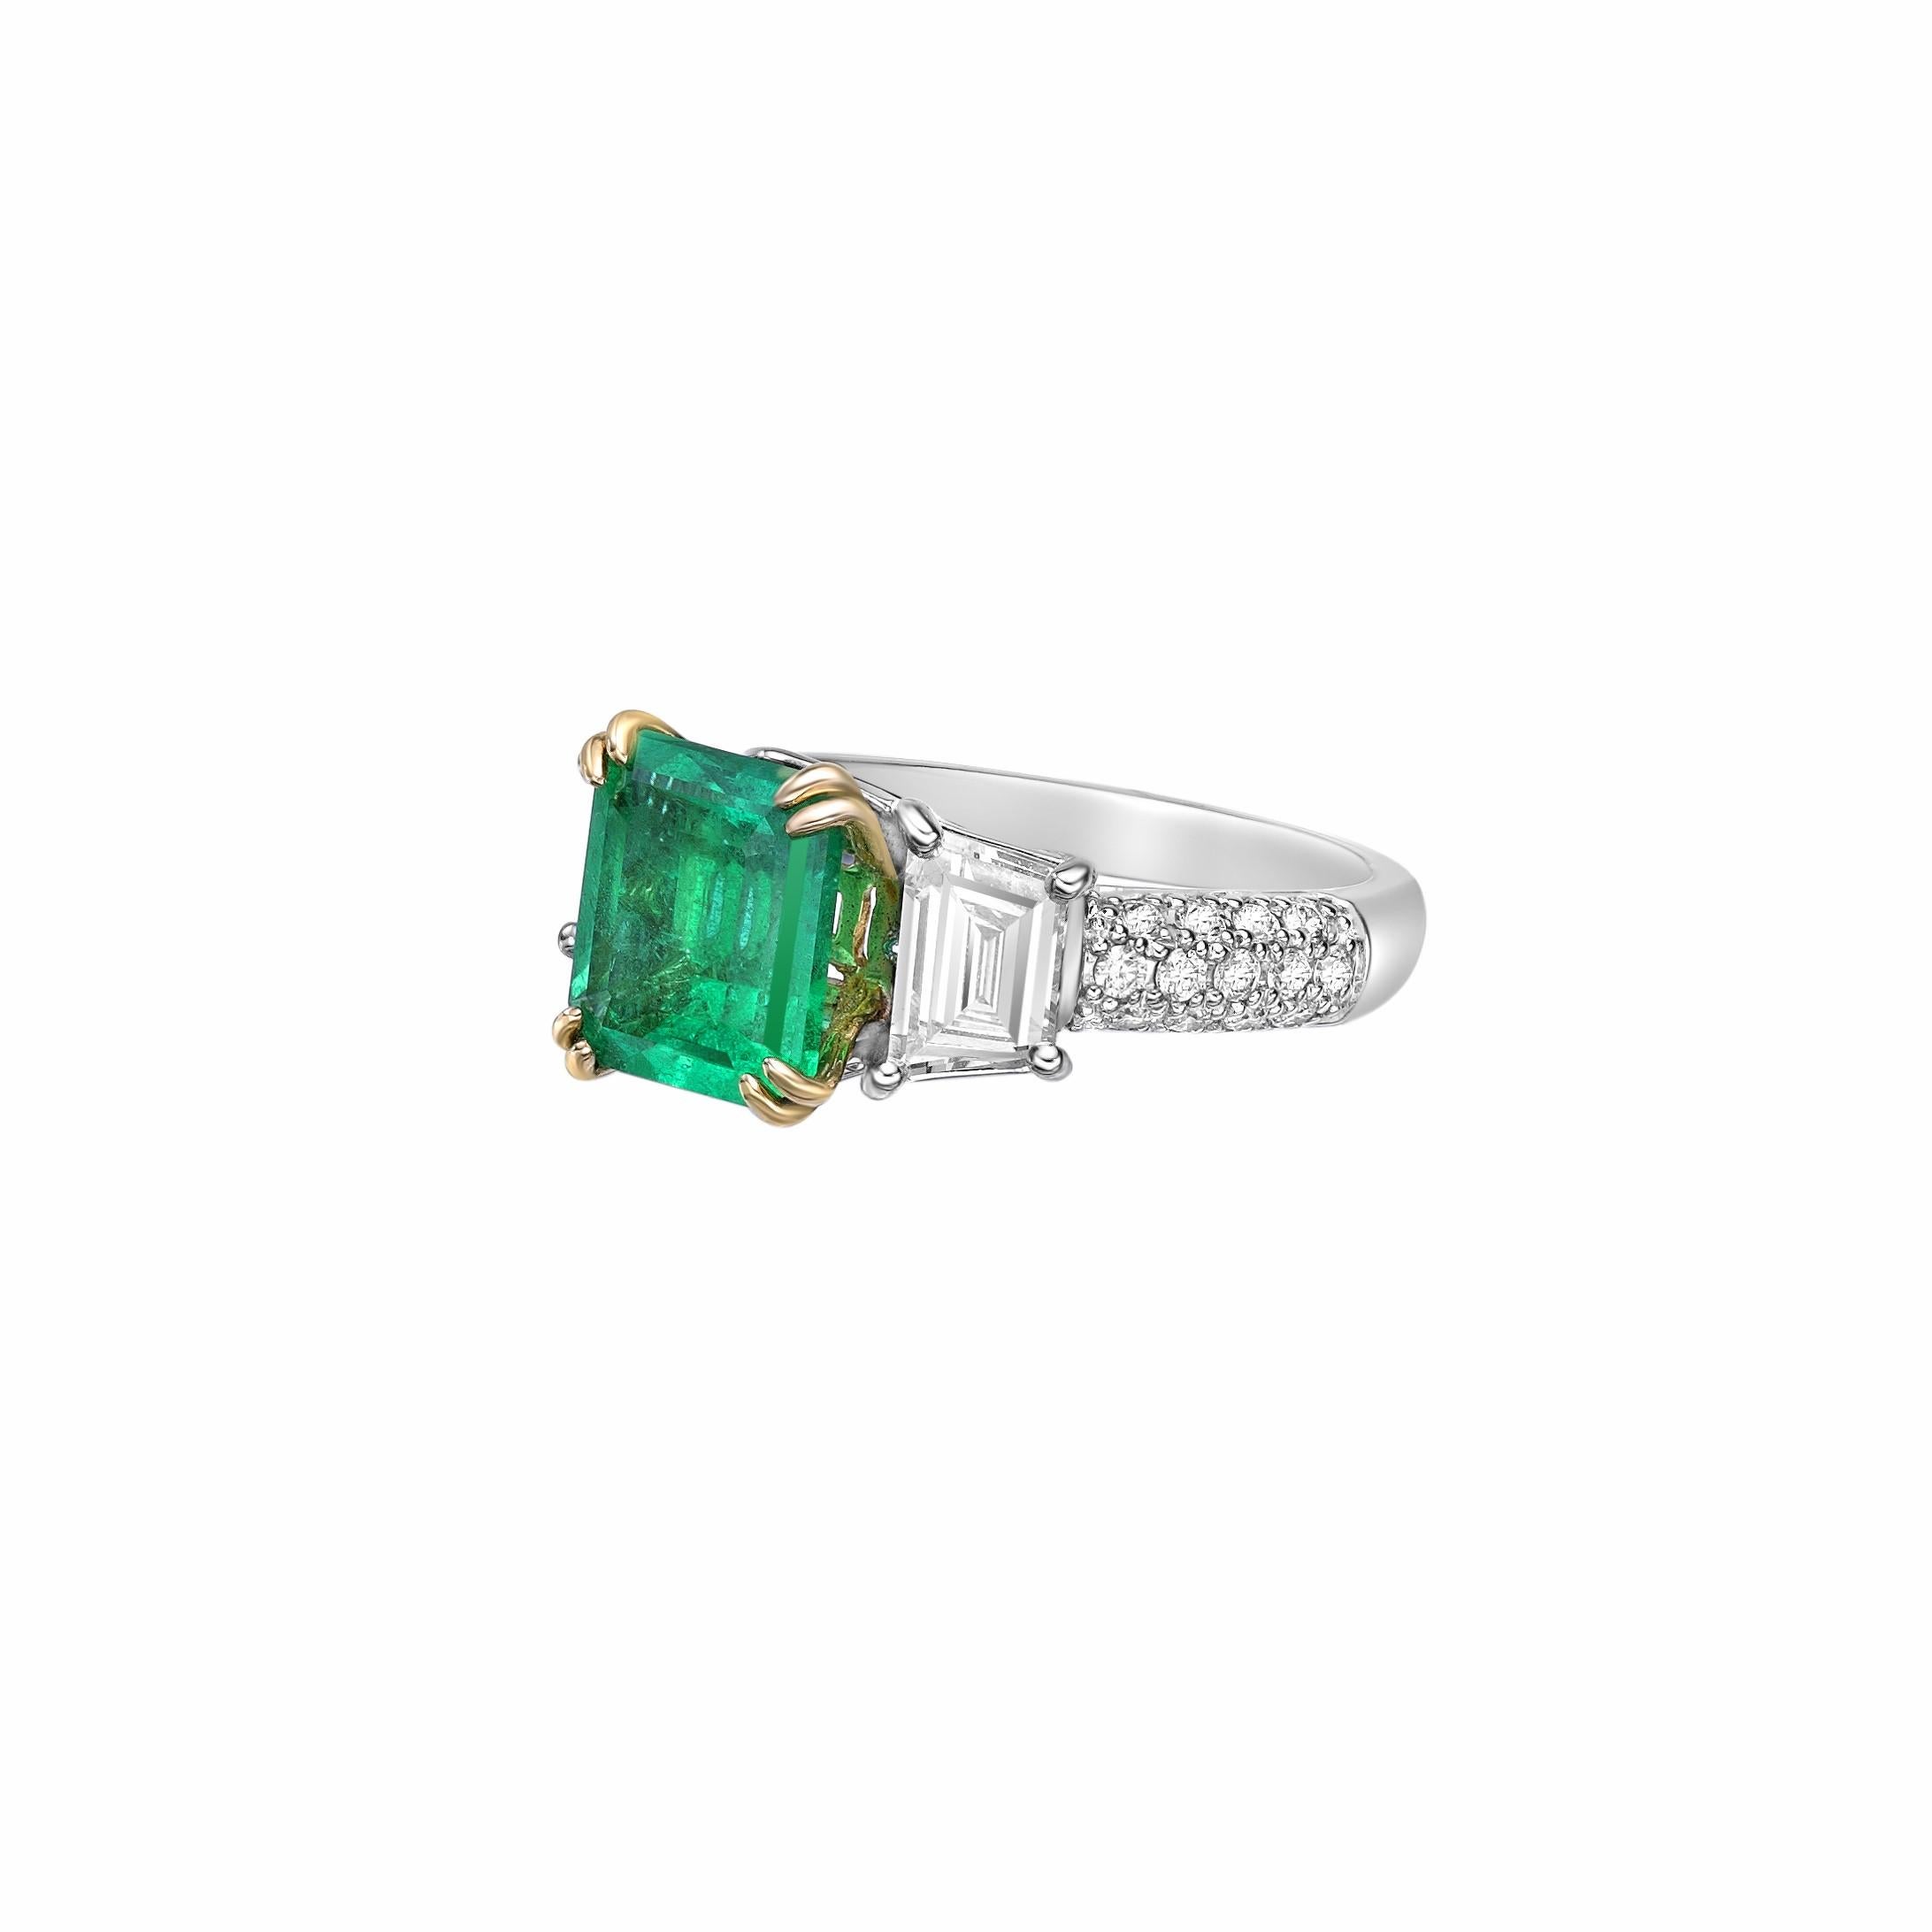 Octagon Cut 2.36 Carat Emerald Fancy Ring in 18Karat White Yellow Gold with White Diamond. For Sale